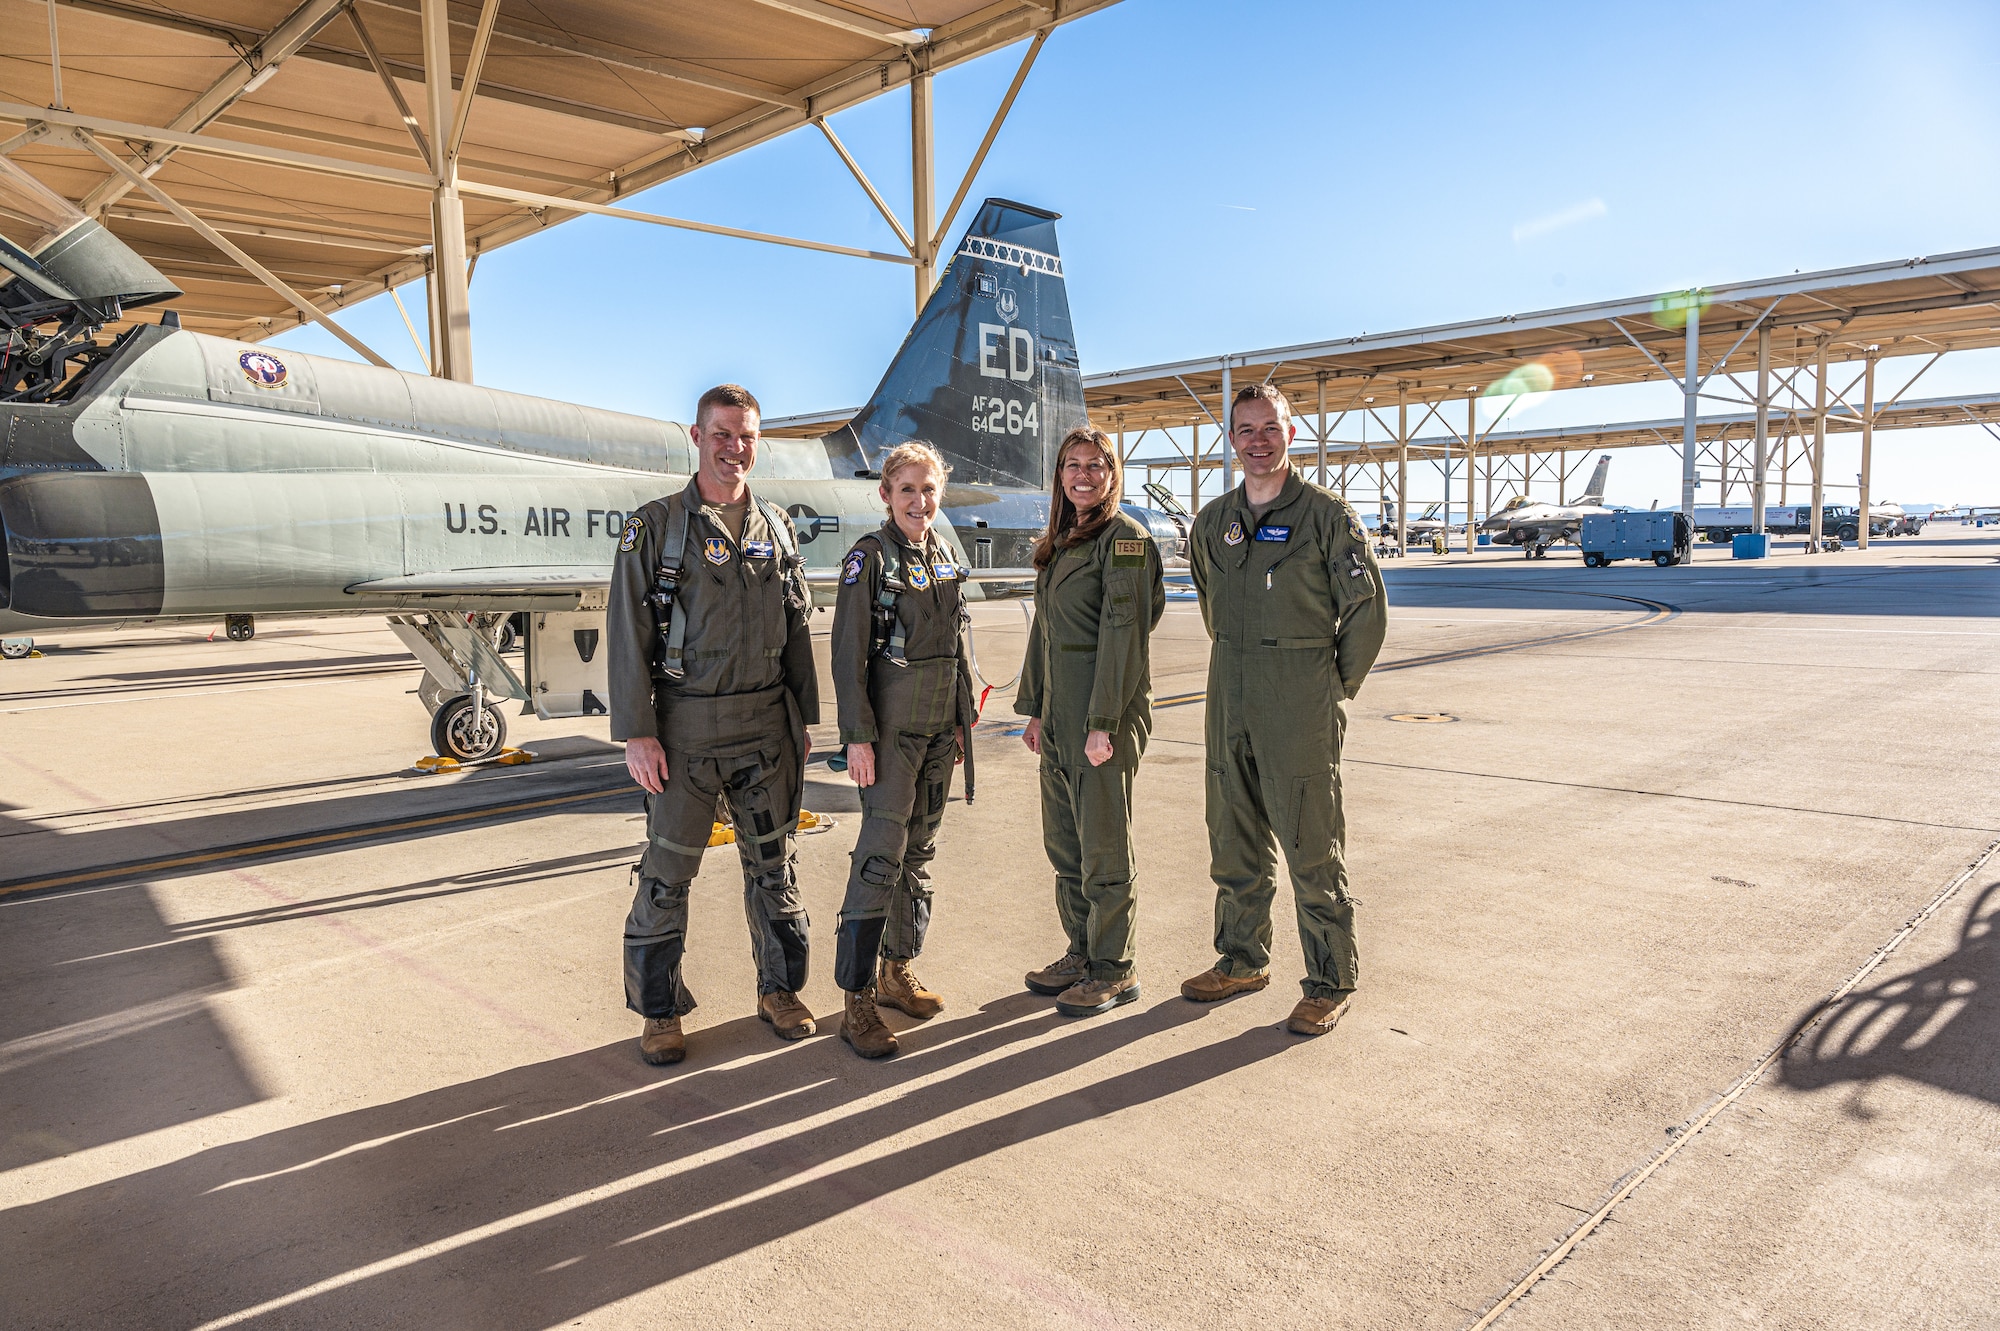 Group photo of Lt. Col. Joshua Egan, 412th Test Wing Chief of Safety, Maj. Gen. Jeannie Leavitt, Department of  the Air Force Chief of Safety, Laura Macaluso, Director, Department of Defense Force Safety and Occupational Health, and Maj. Philip Downing, 370th Flight Test Squadron, F-16 Test Pilot